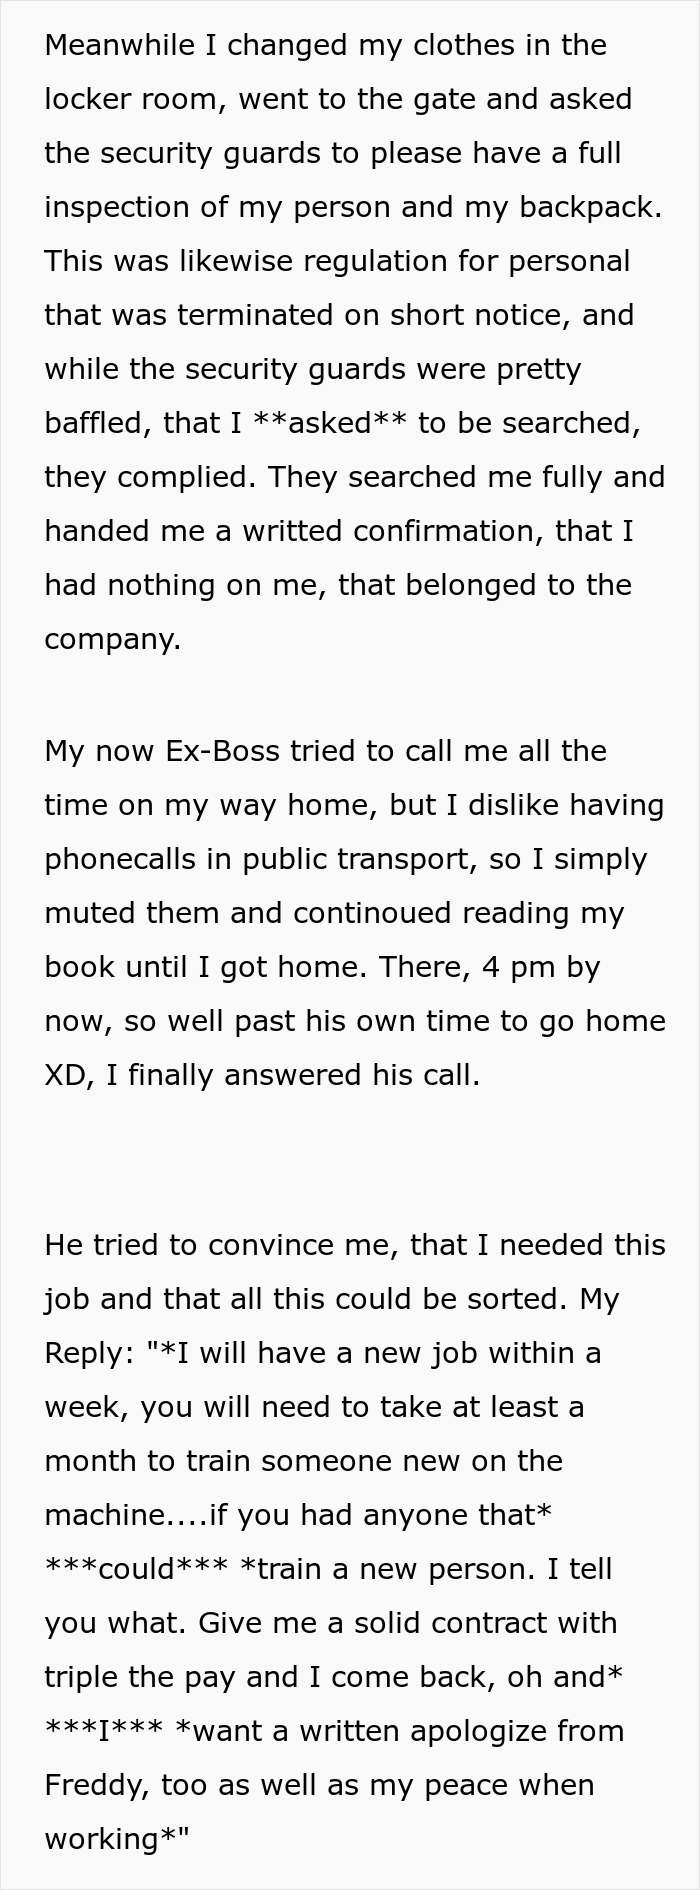 Boss Shows Up With Termination Letter In Hopes Of Worker Apologizing For “Bullying” His Colleague, He Signs The Papers And Takes The Whole Department Down